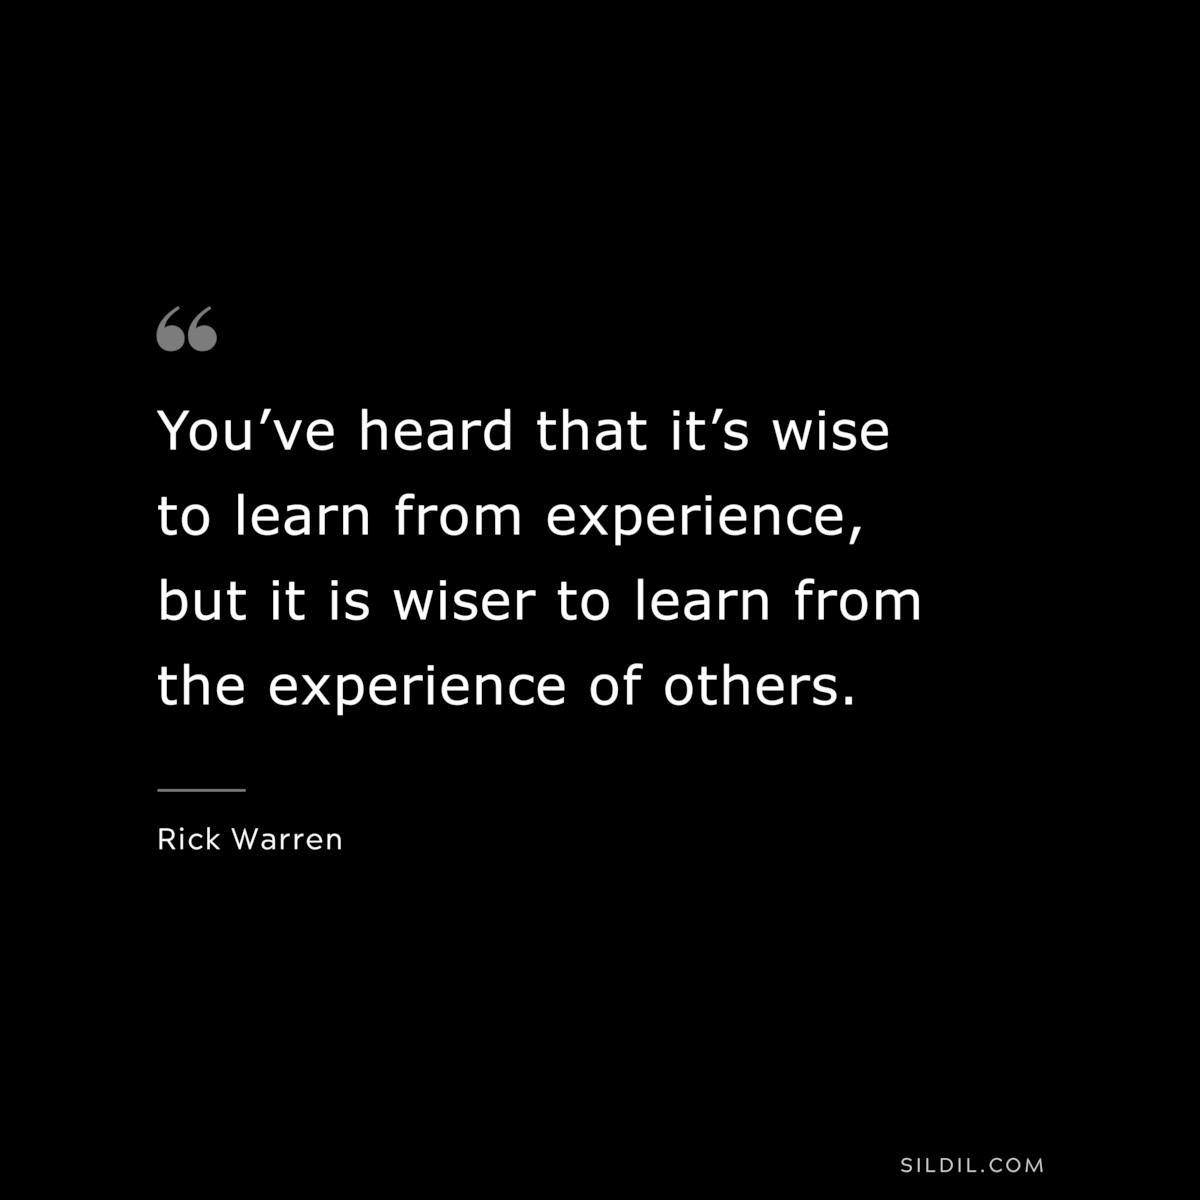 You’ve heard that it’s wise to learn from experience, but it is wiser to learn from the experience of others. ― Rick Warren